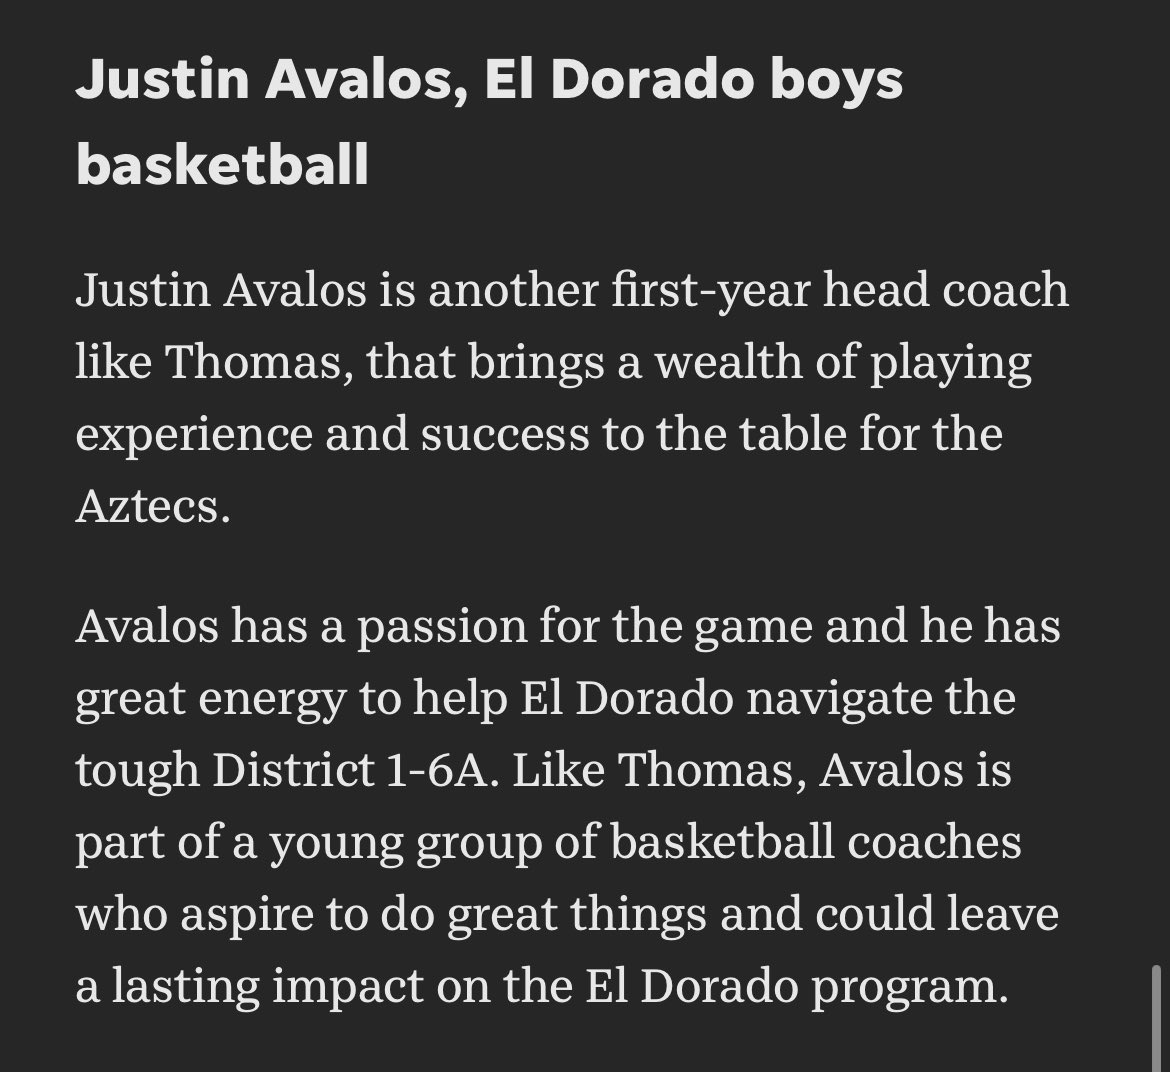 Super BLESSED to be part of the EMPIRE to help guide and build our AZTECS! @ElDoHoops